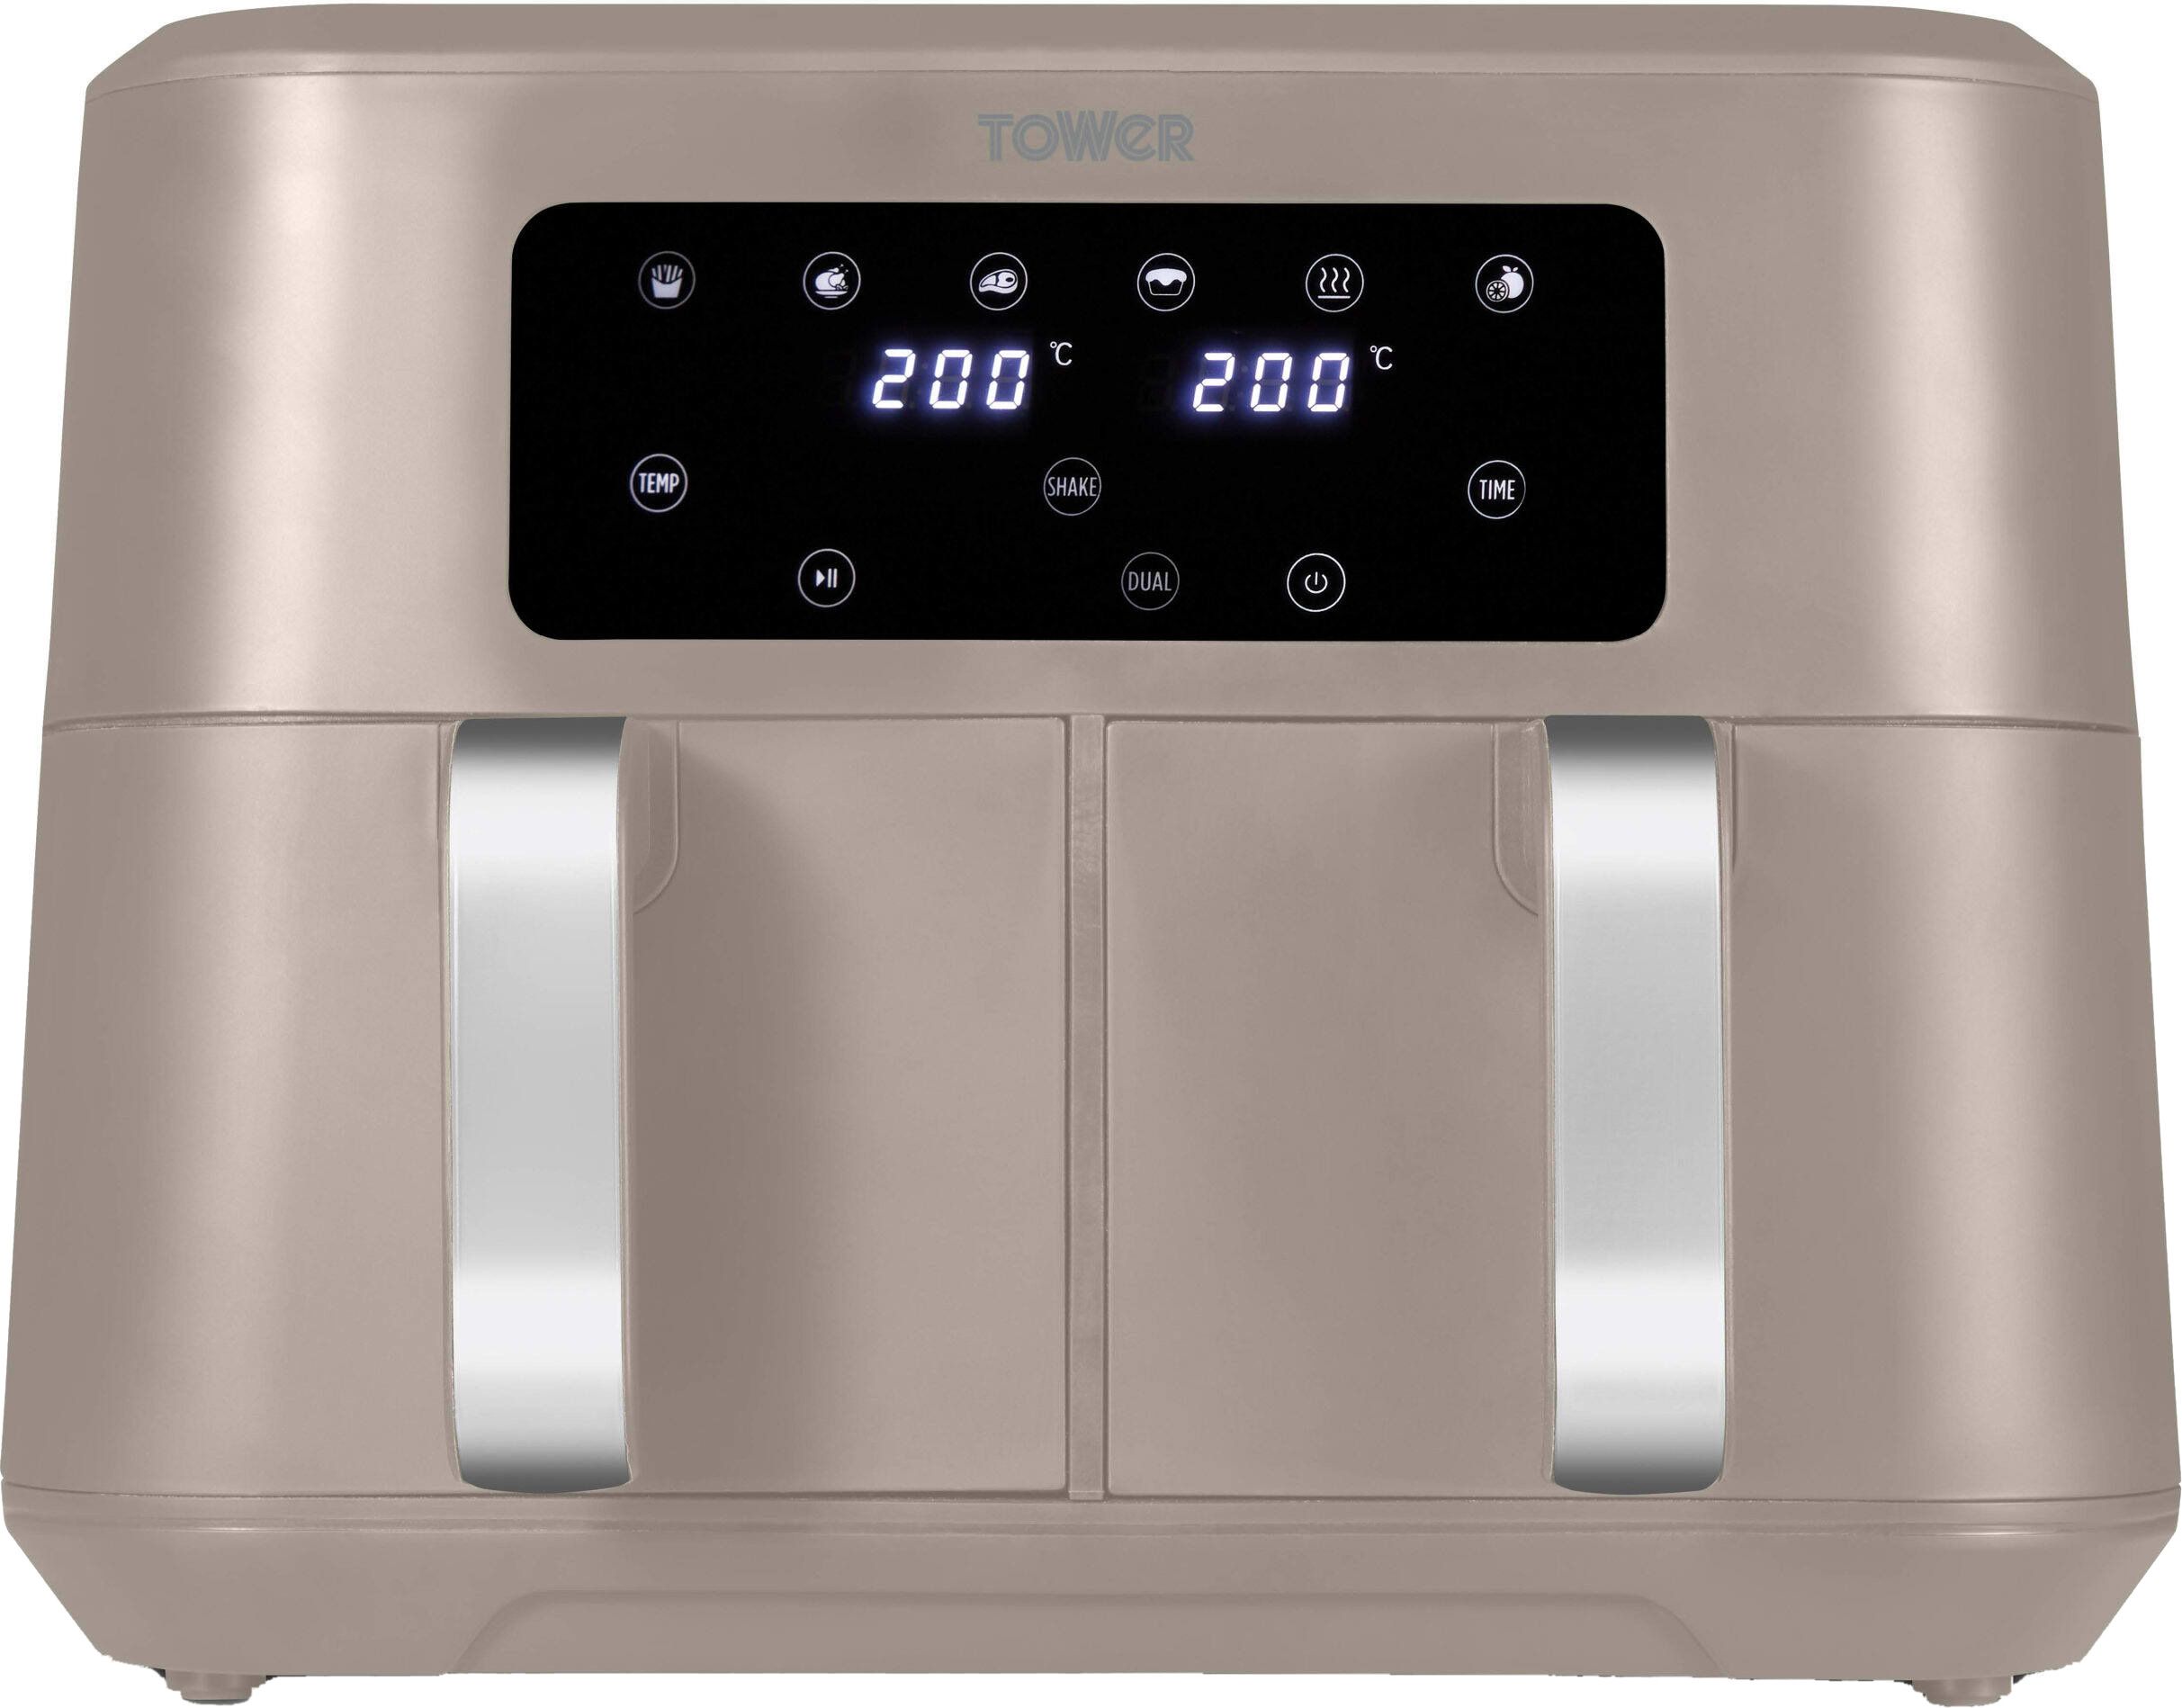 Tower T17137MSH Dual Drawer Air Fryer - Taupe Brown